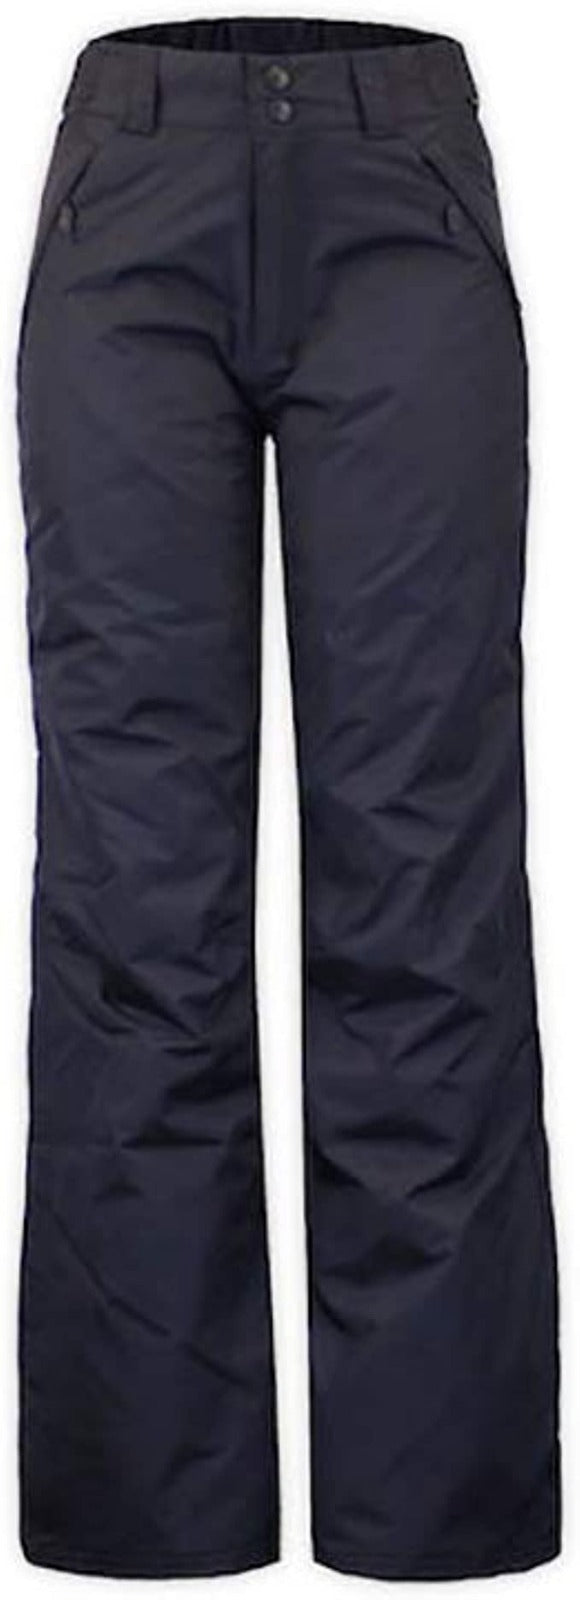 Rawik Insulated Water-Resistant Storm Pant (Women's)